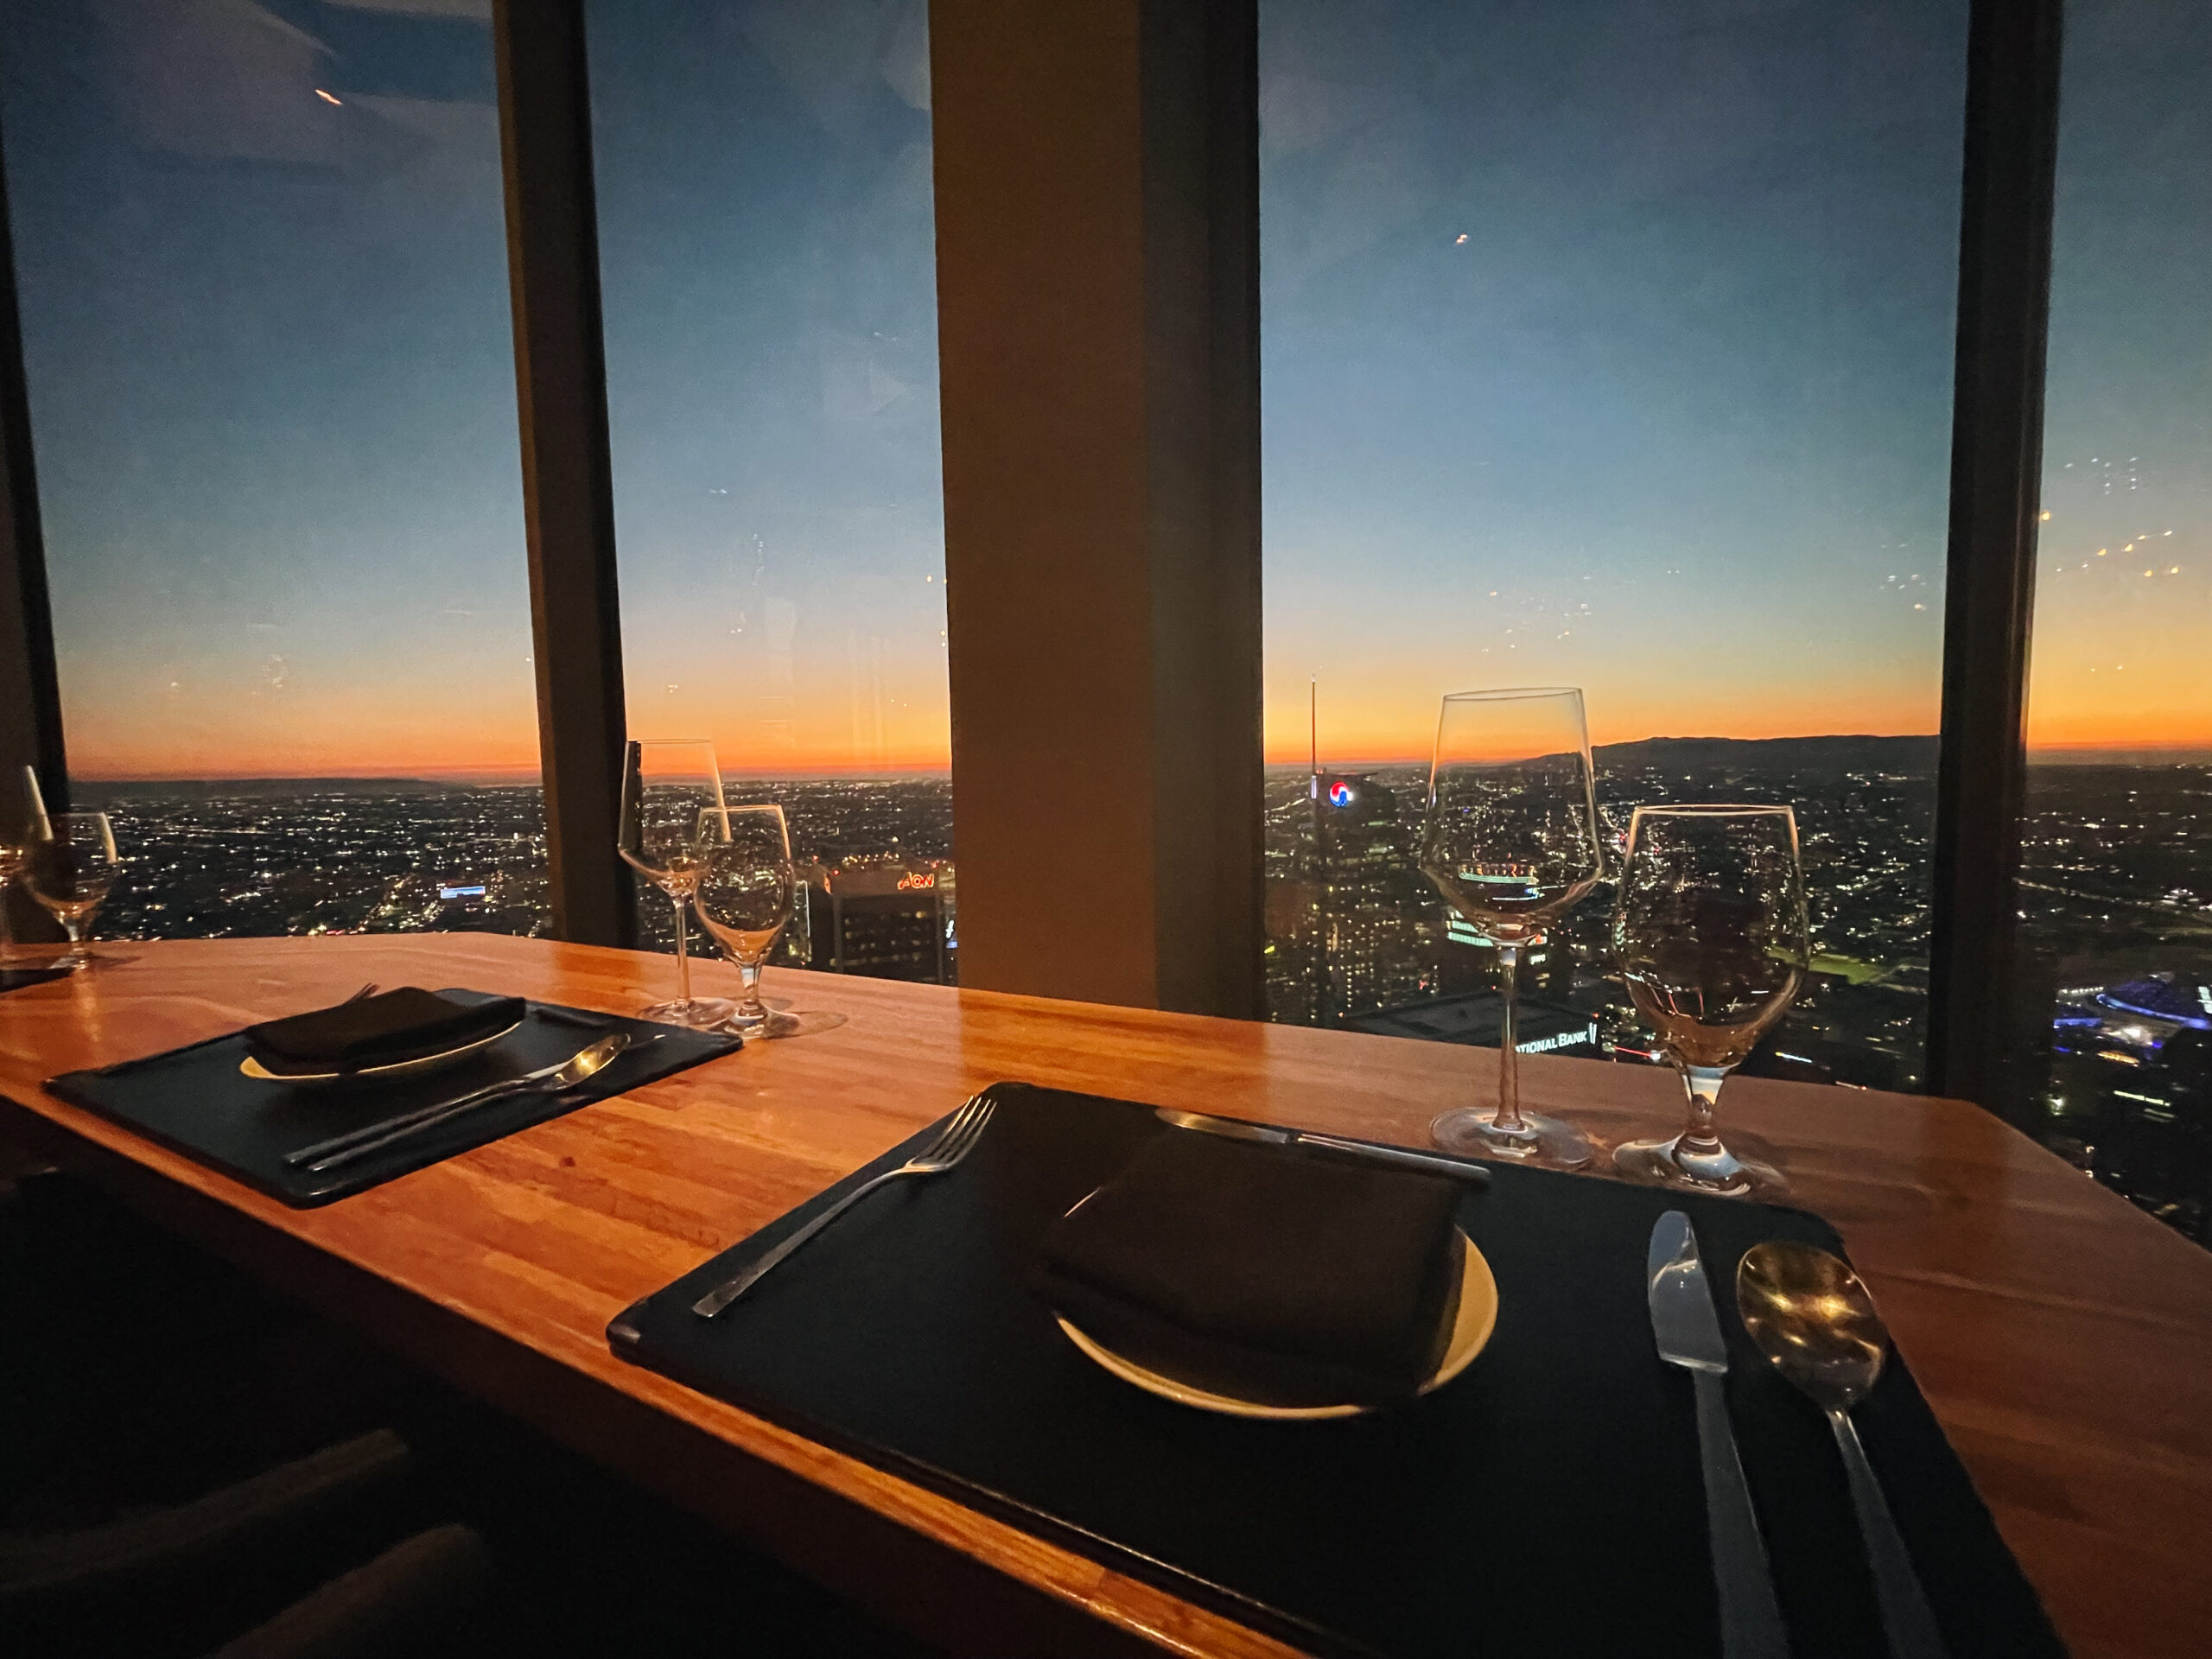 Edge Table window view at 71 Above Sky Lounge in Los Angeles